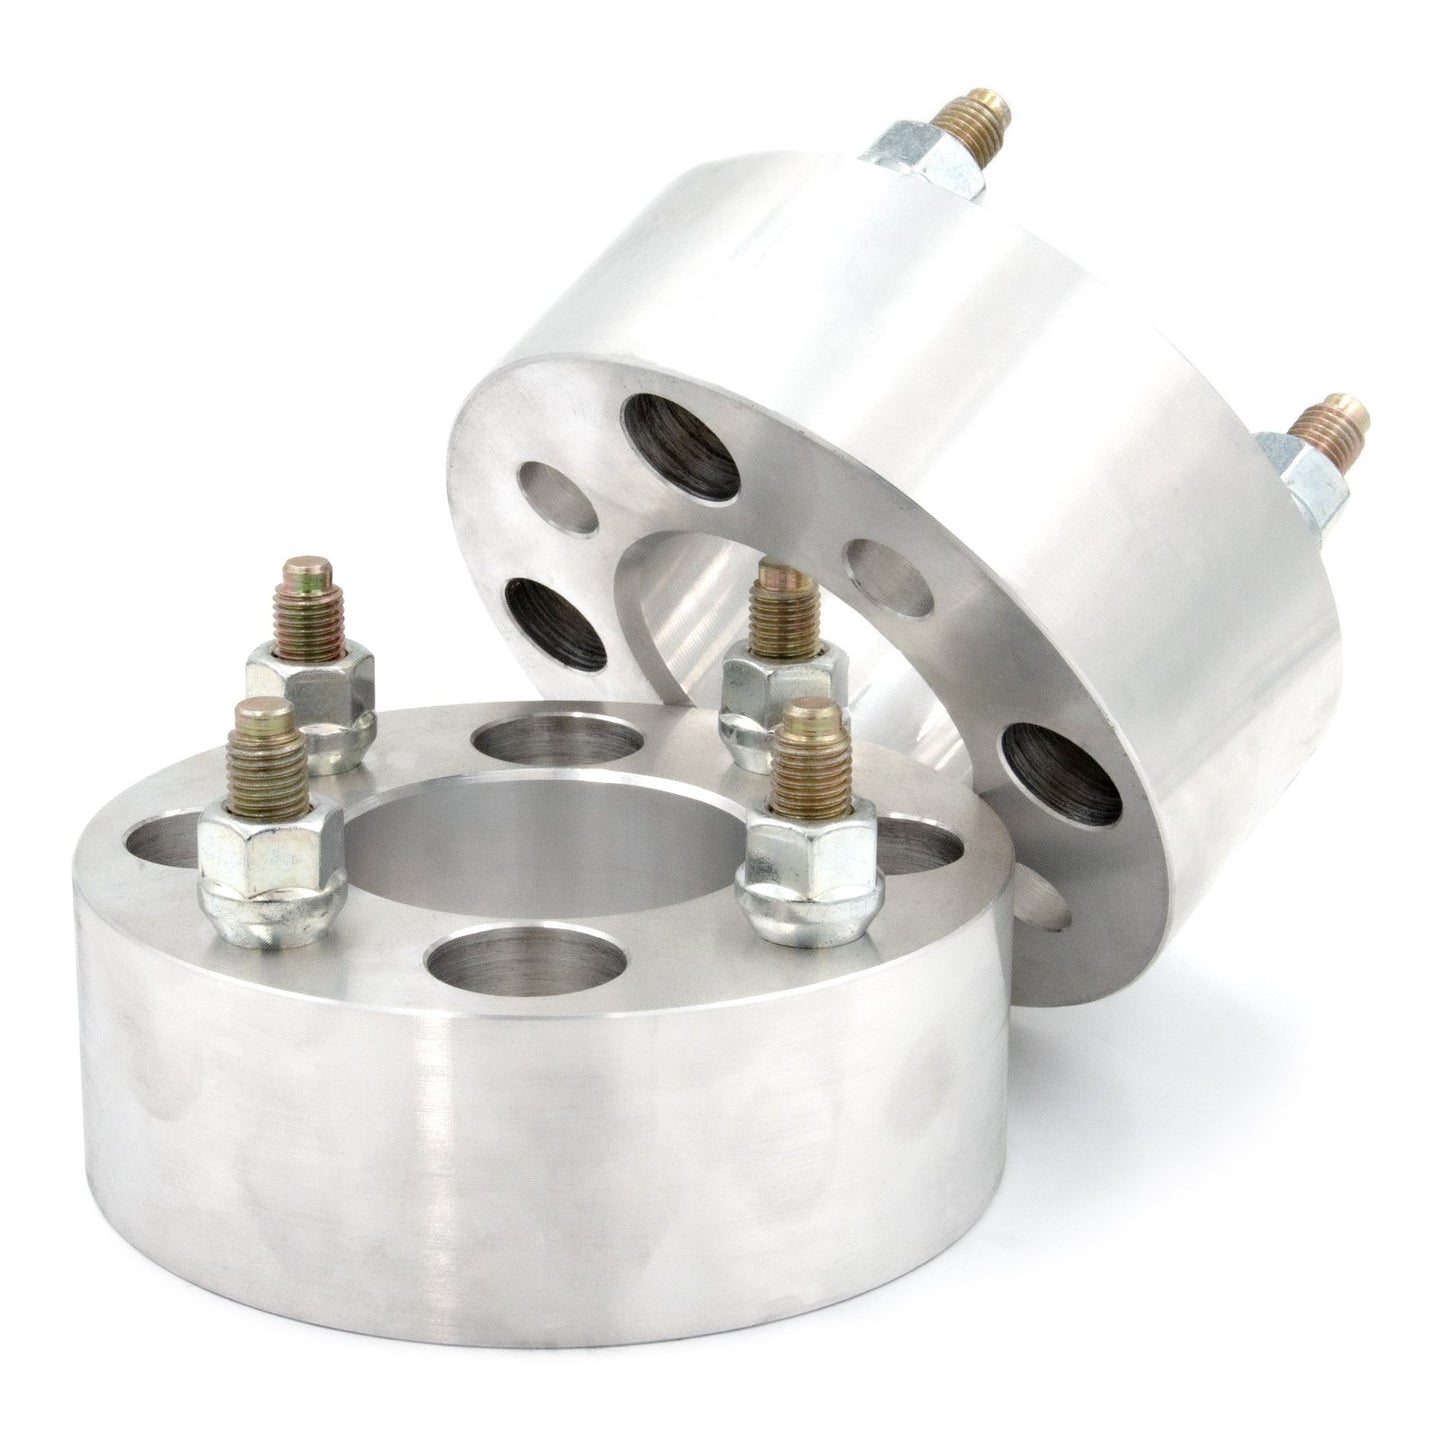 4x130 to 4x100 Wheel Spacer/Adapter - Thickness: 3/4"- 4"